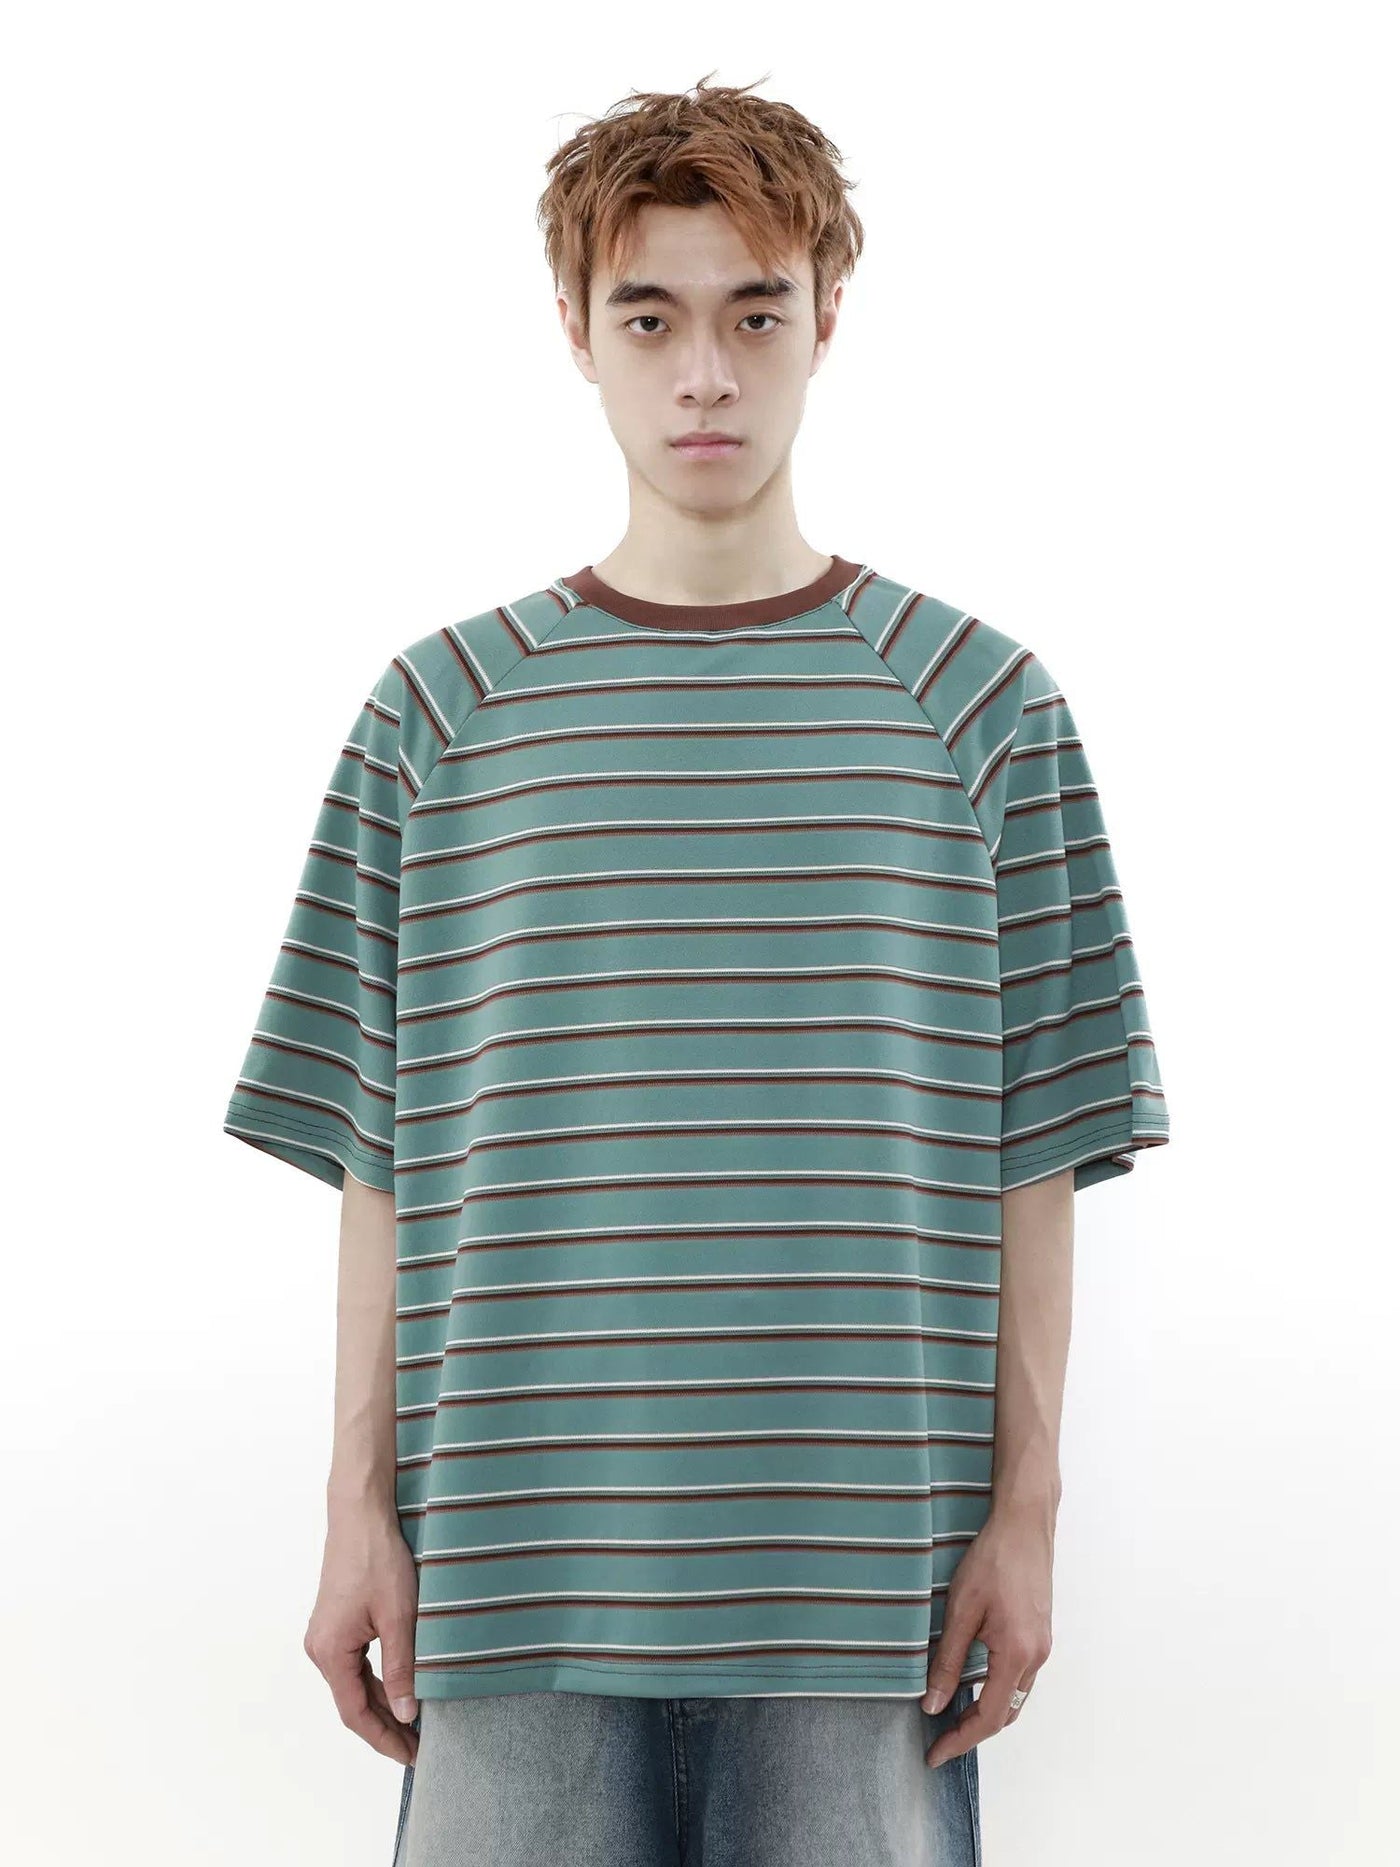 Retro Stripes Casual T-Shirt Korean Street Fashion T-Shirt By Mr Nearly Shop Online at OH Vault